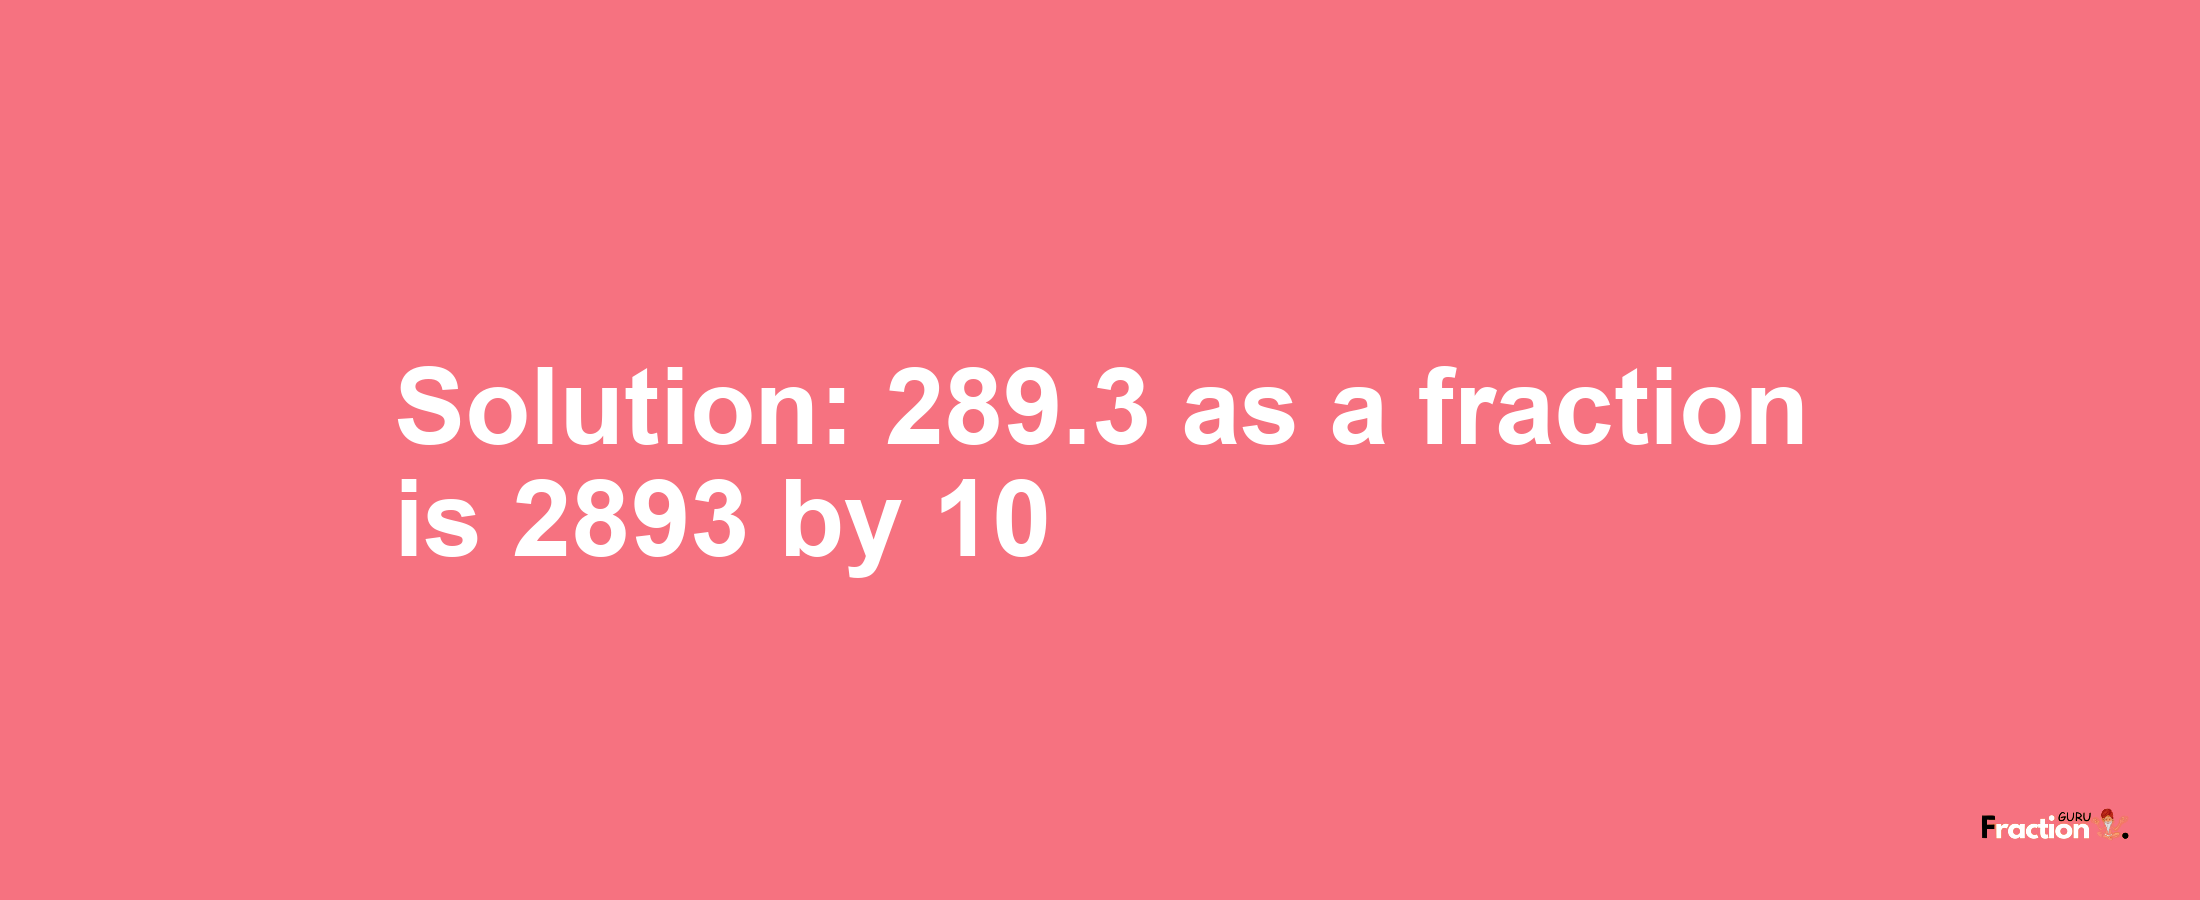 Solution:289.3 as a fraction is 2893/10